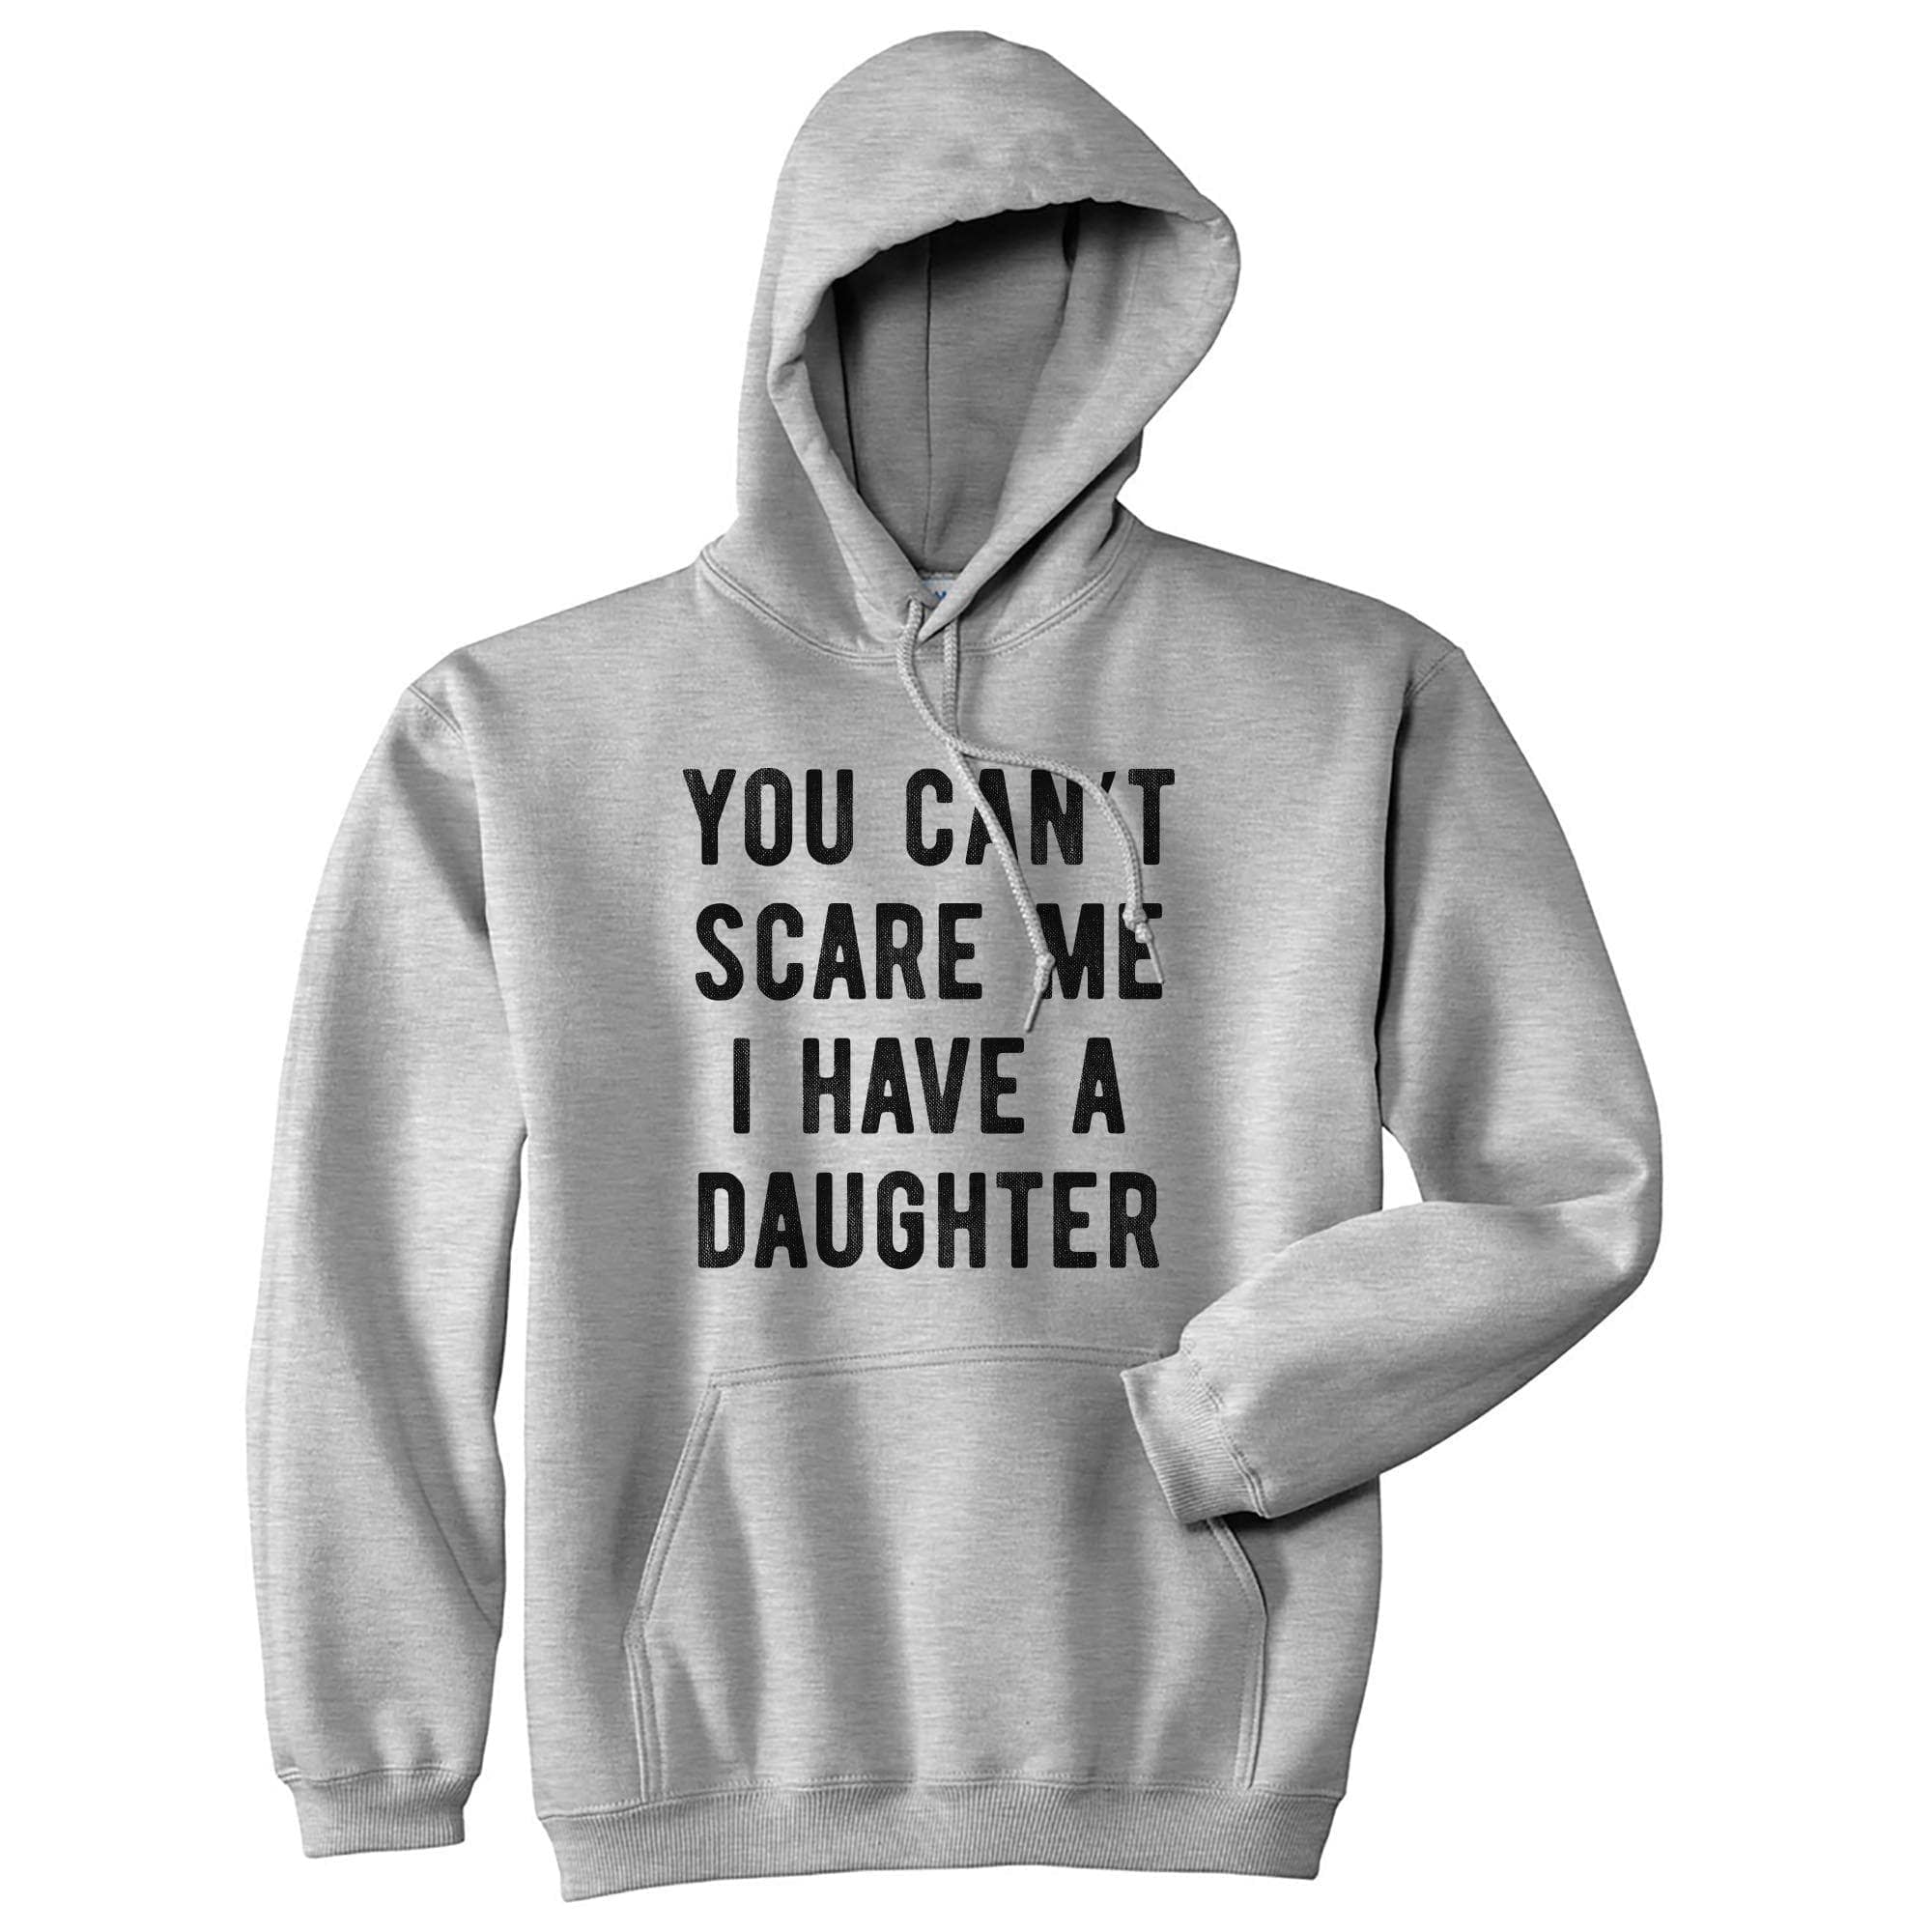 You Can't Scare Me I Have A Daughter Hoodie - Crazy Dog T-Shirts